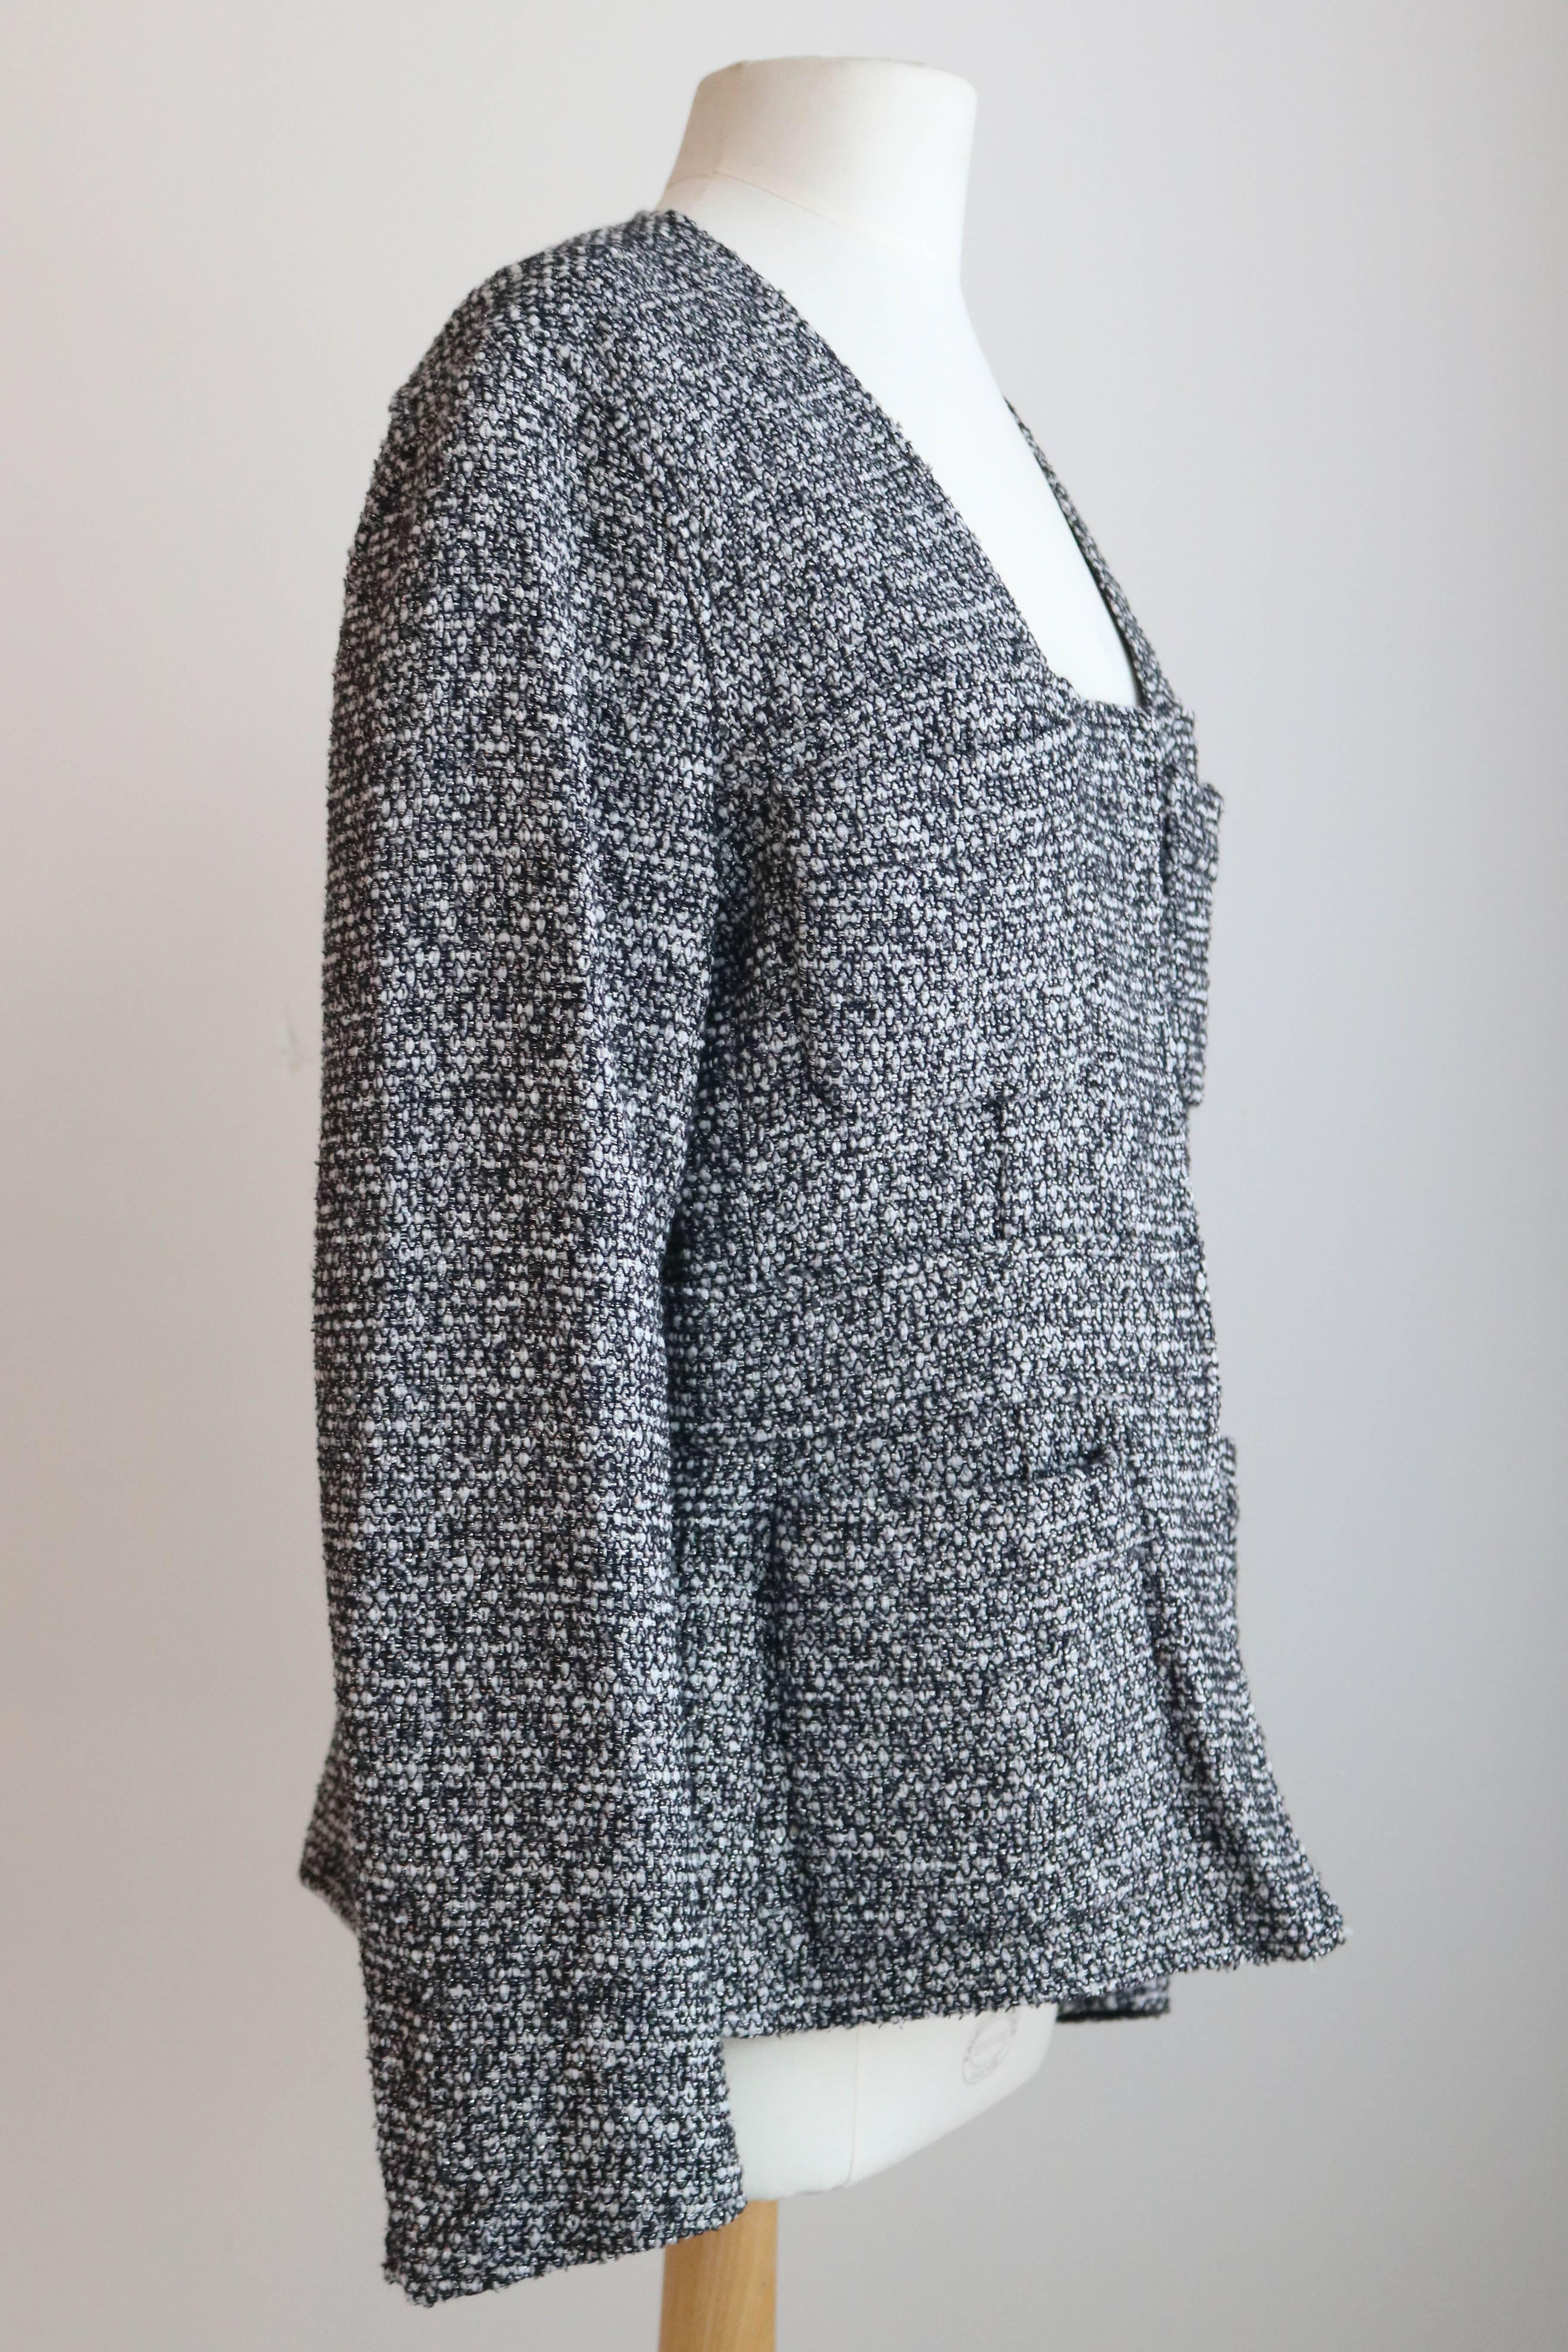 Offered is a great looking piece by YSL, a black and white tweed jacket with silver thread embellishment throughout. Beautiful details, stitched inset belt design to enhance waist, four pockets, and hidden zipper.  Made in France.  Condition is very